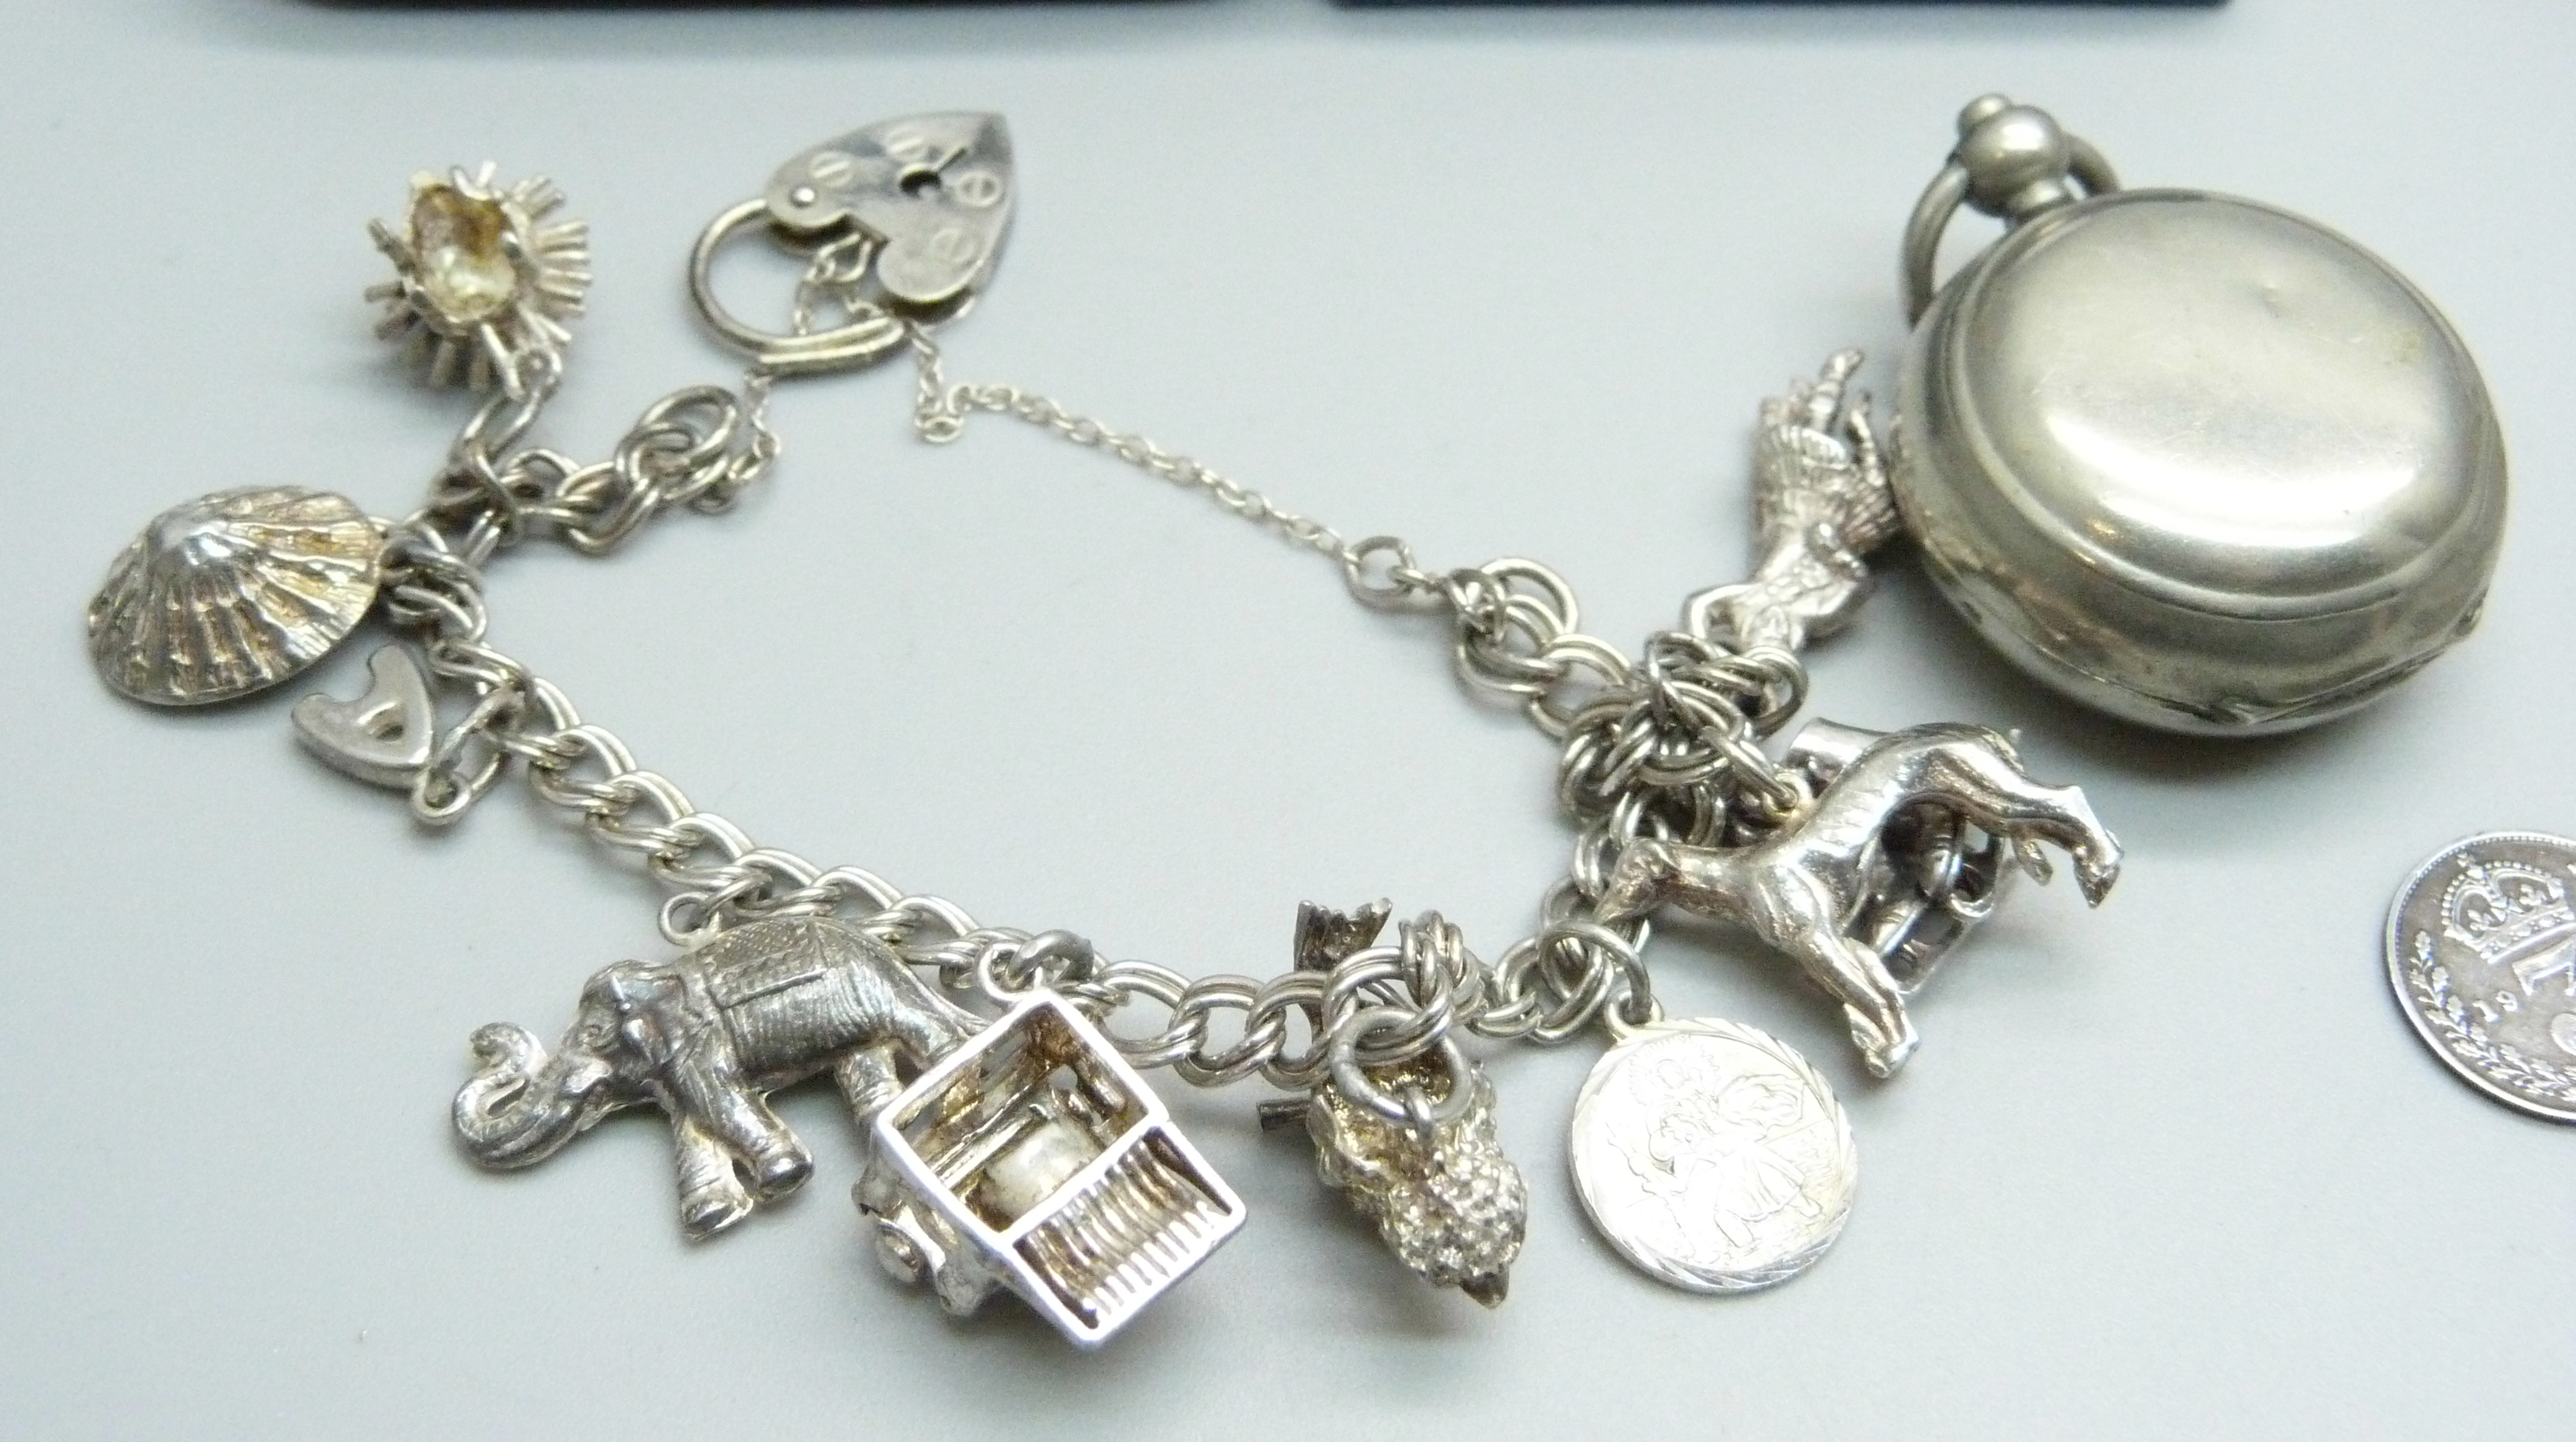 Silver jewellery including four silver bangles and a silver charm bracelet, coins and a sovereign - Image 4 of 6